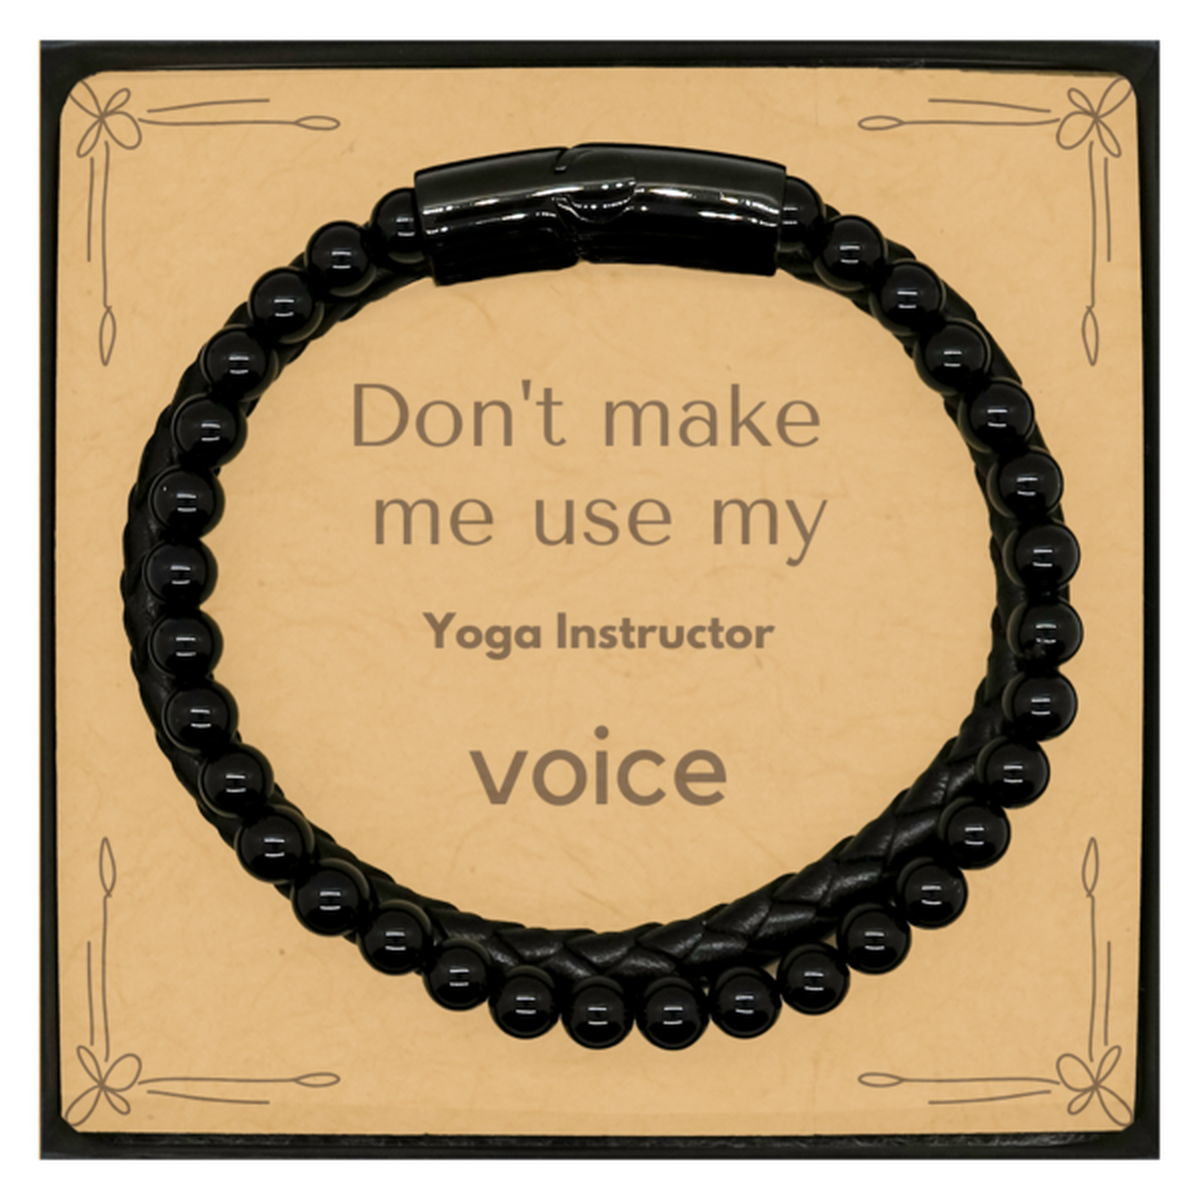 Don't make me use my Yoga Instructor voice, Sarcasm Yoga Instructor Card Gifts, Christmas Yoga Instructor Stone Leather Bracelets Birthday Unique Gifts For Yoga Instructor Coworkers, Men, Women, Colleague, Friends